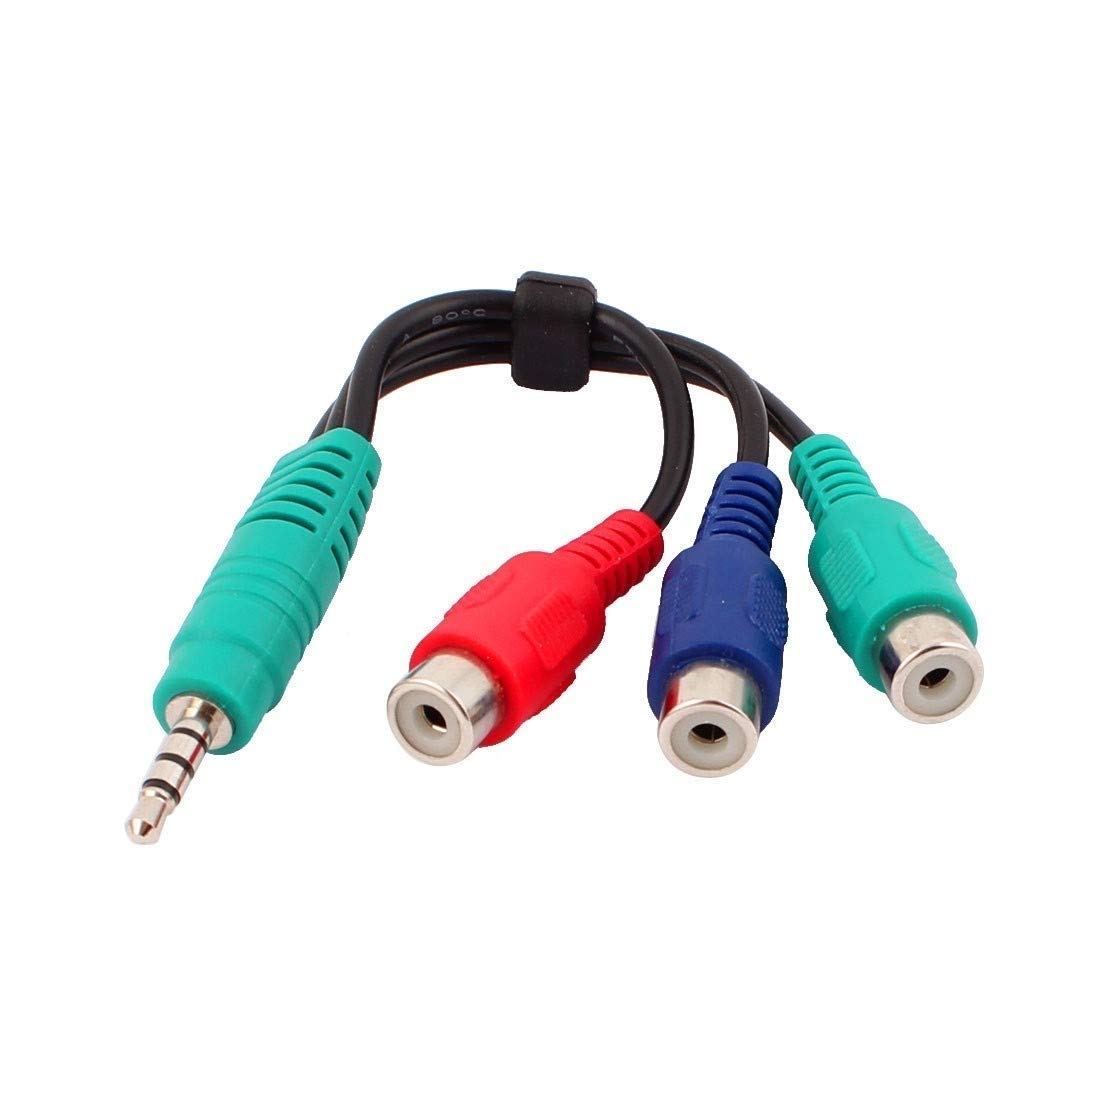 3.5mm Male to 3RCA Female Video Adapter Cable for AV, LCD TV, HDTV-3.5MM to 3RCA FEMALE